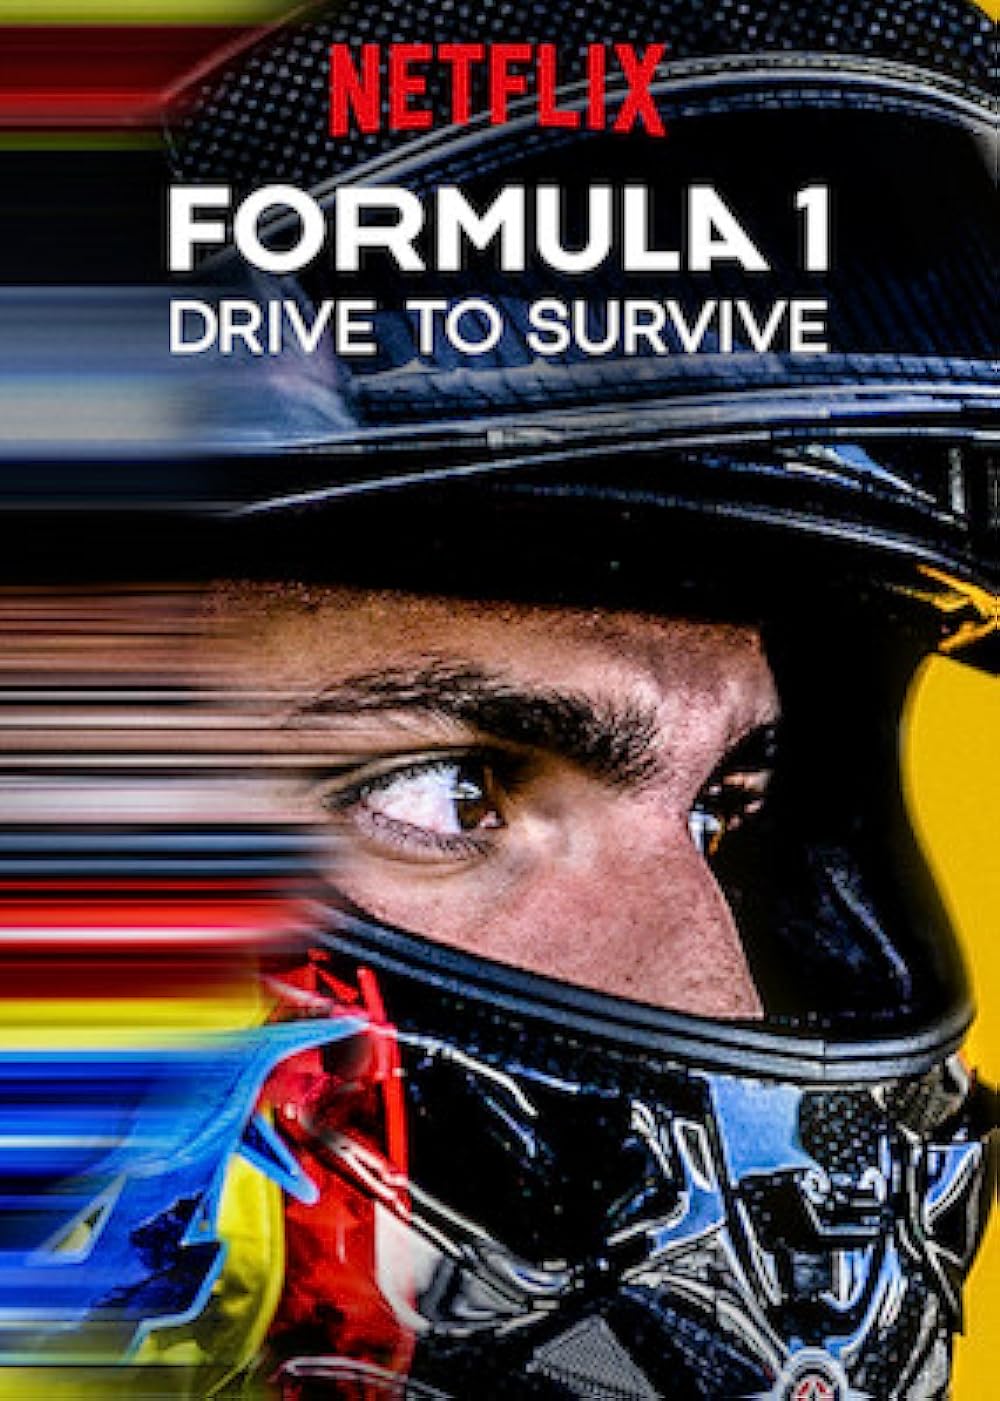 Formula 1: Drive to Survive season 6 (February 23) - Streaming on NetflixDrive to Survive returns with season 6 to immerse fans in the high-octane world of F1, offering behind-the-scenes access to the 2023 season. This instalment captures the intense competition, personal dramas, and velocity of the sport, focusing on the dynamics within and between the ten teams and their 20 drivers. The 2023 season, dominated by Max Verstappen’s remarkable achievement of winning 19 out of 22 races, sets the backdrop for this entry.